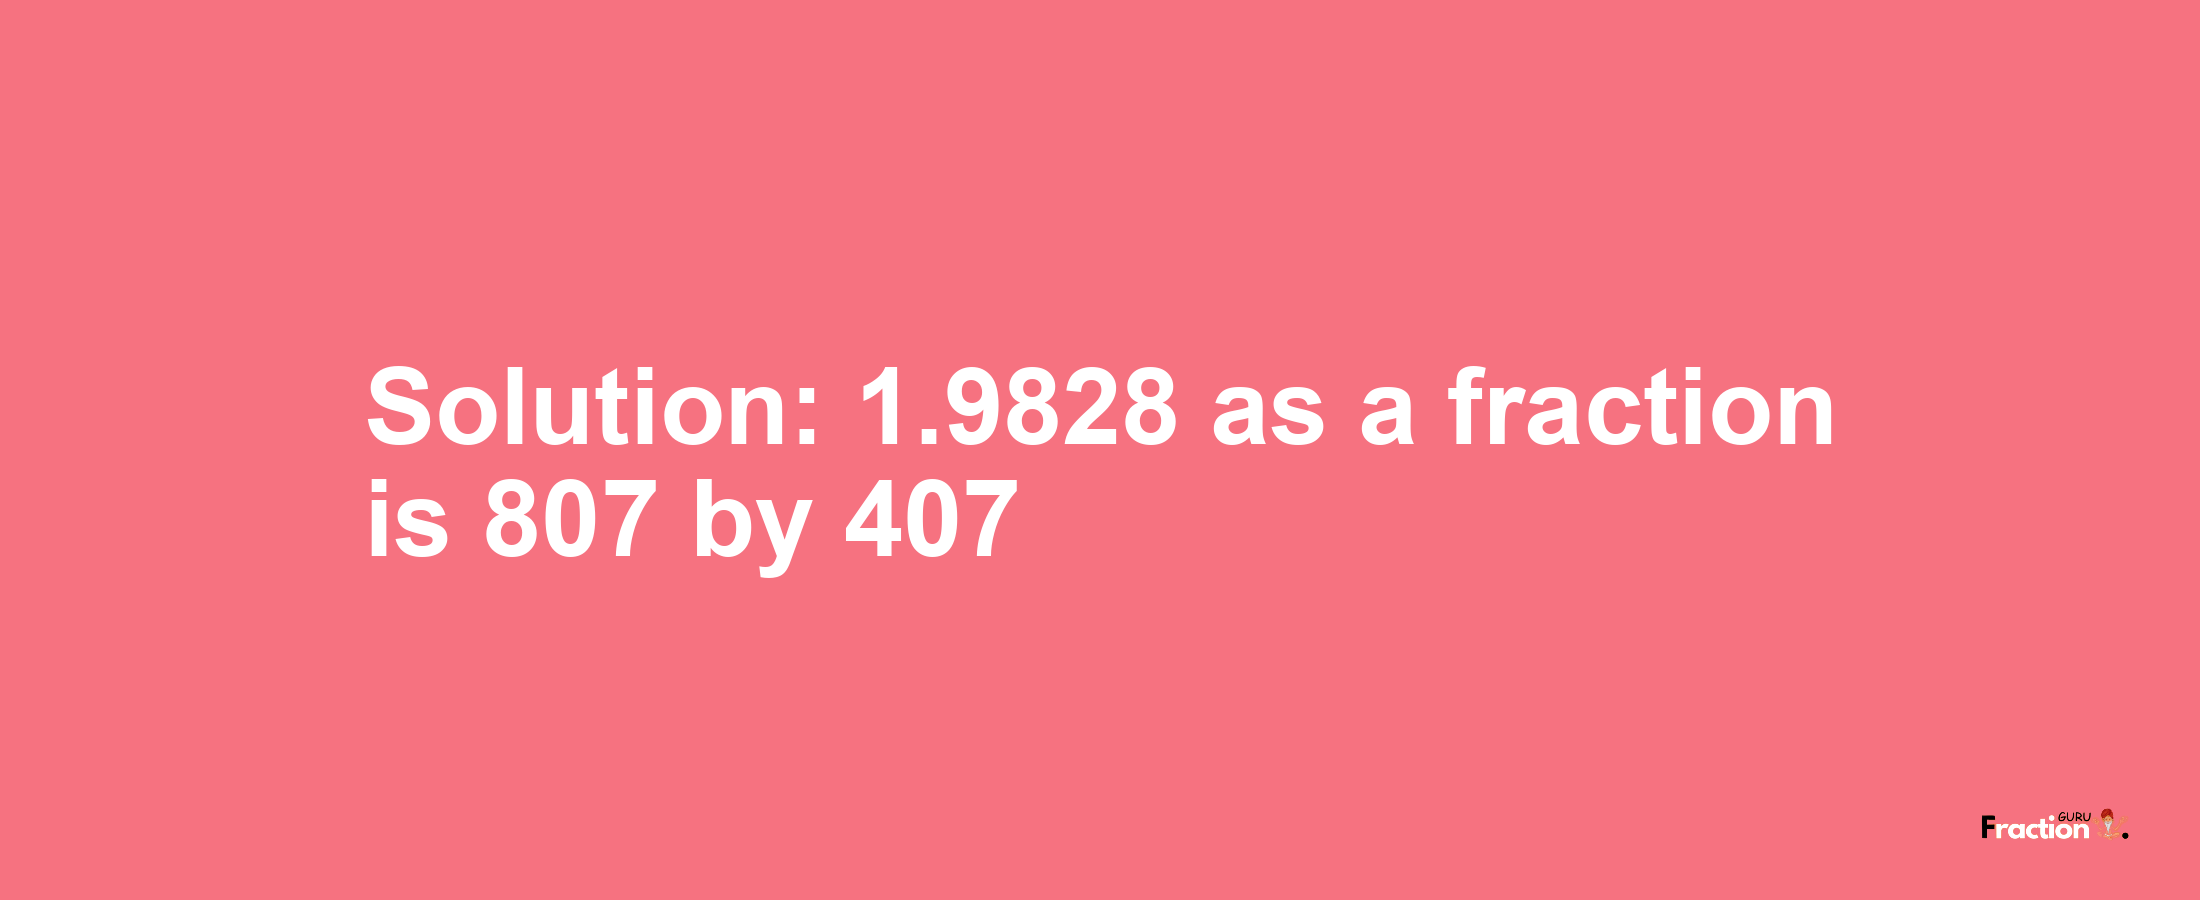 Solution:1.9828 as a fraction is 807/407